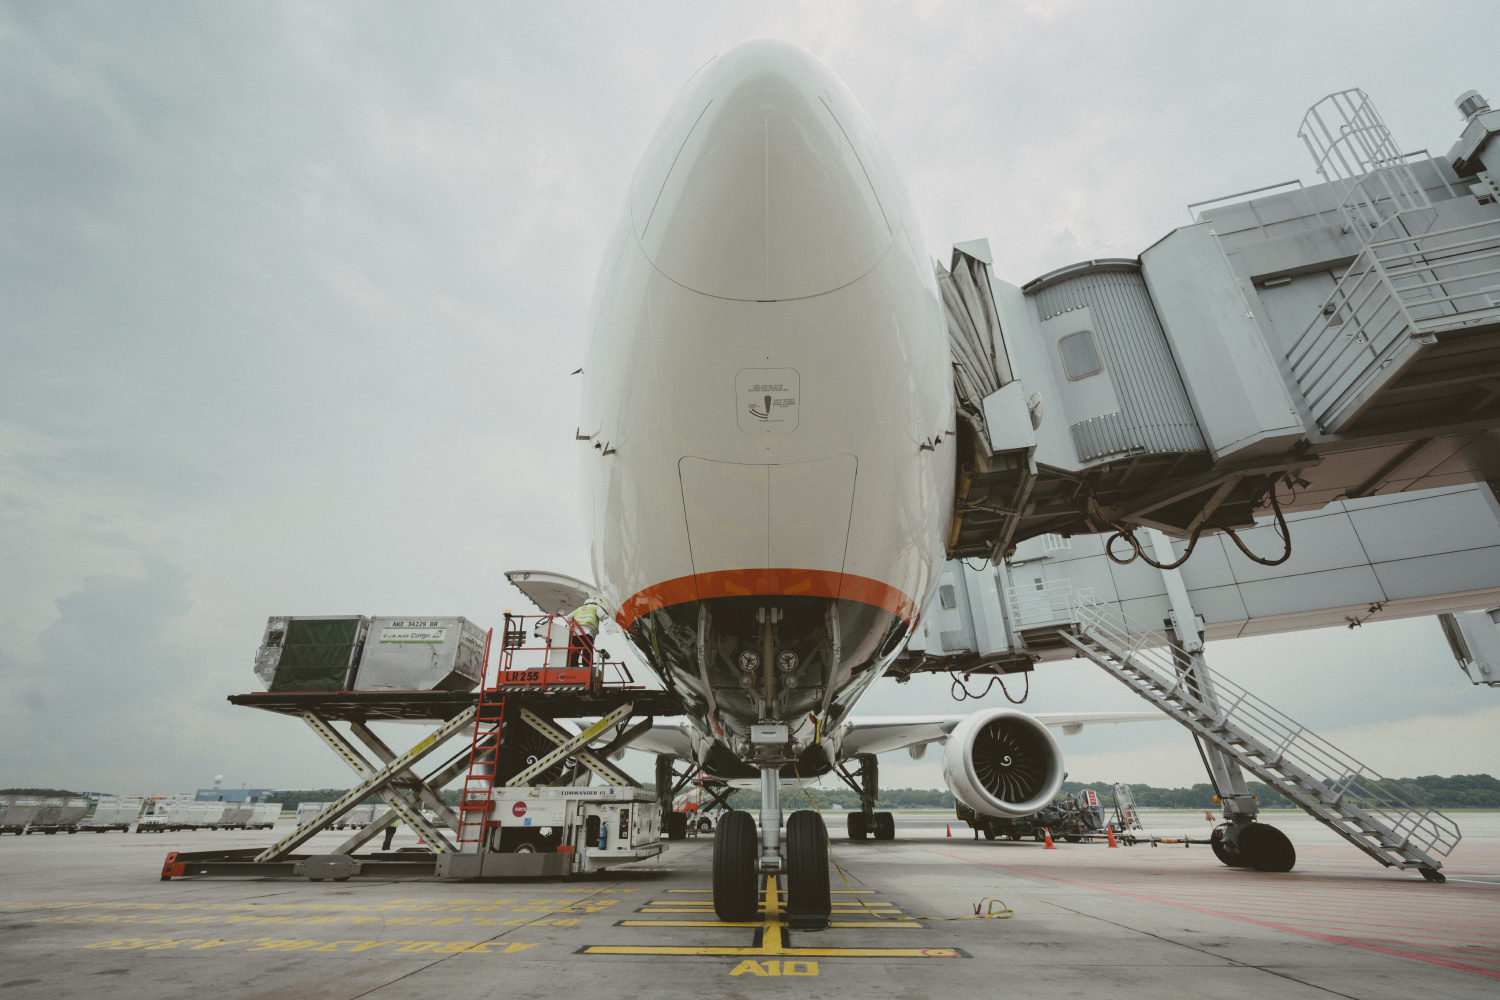 Aircraft for Ground Servicing - Changi Airport